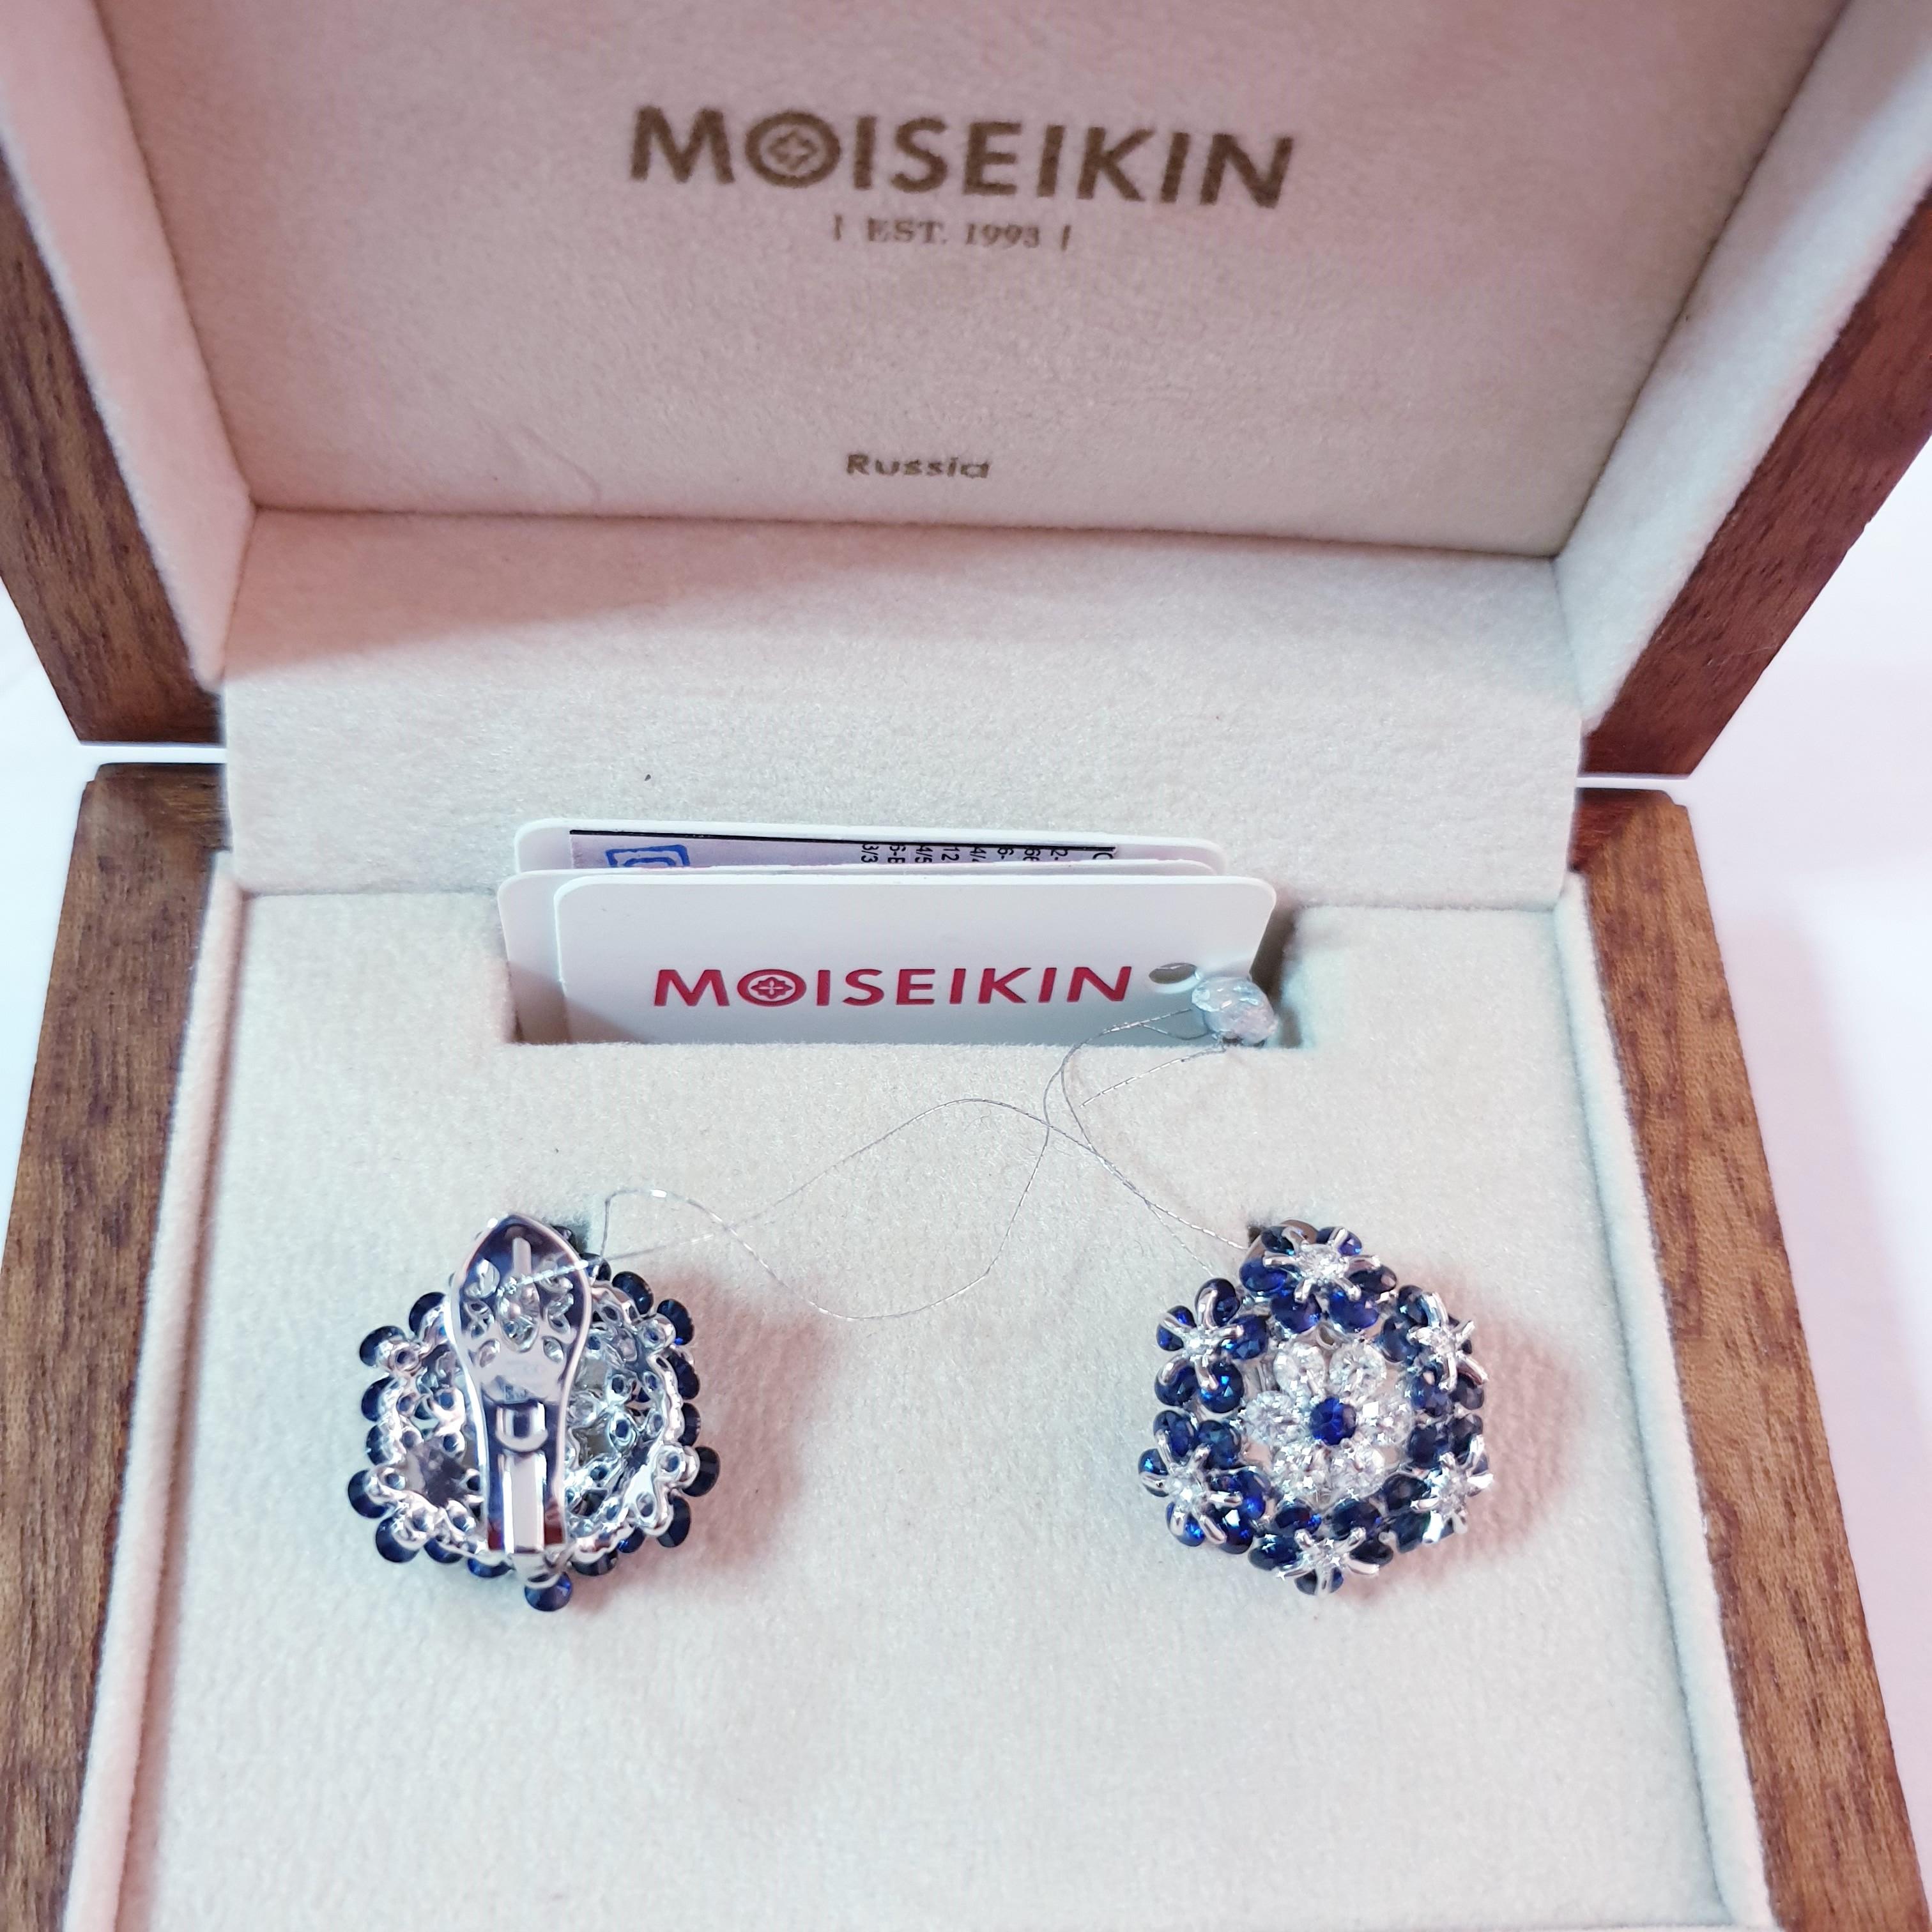 Crafted to perfection, MOISEIKIN's sapphire and diamond ring from Tsvetodelika collection is made with  total 5.16 carats of radiant diamond-cut blue sapphires and 0.9 carats of diamonds, in which gems dances giving joy of light. Designed as a